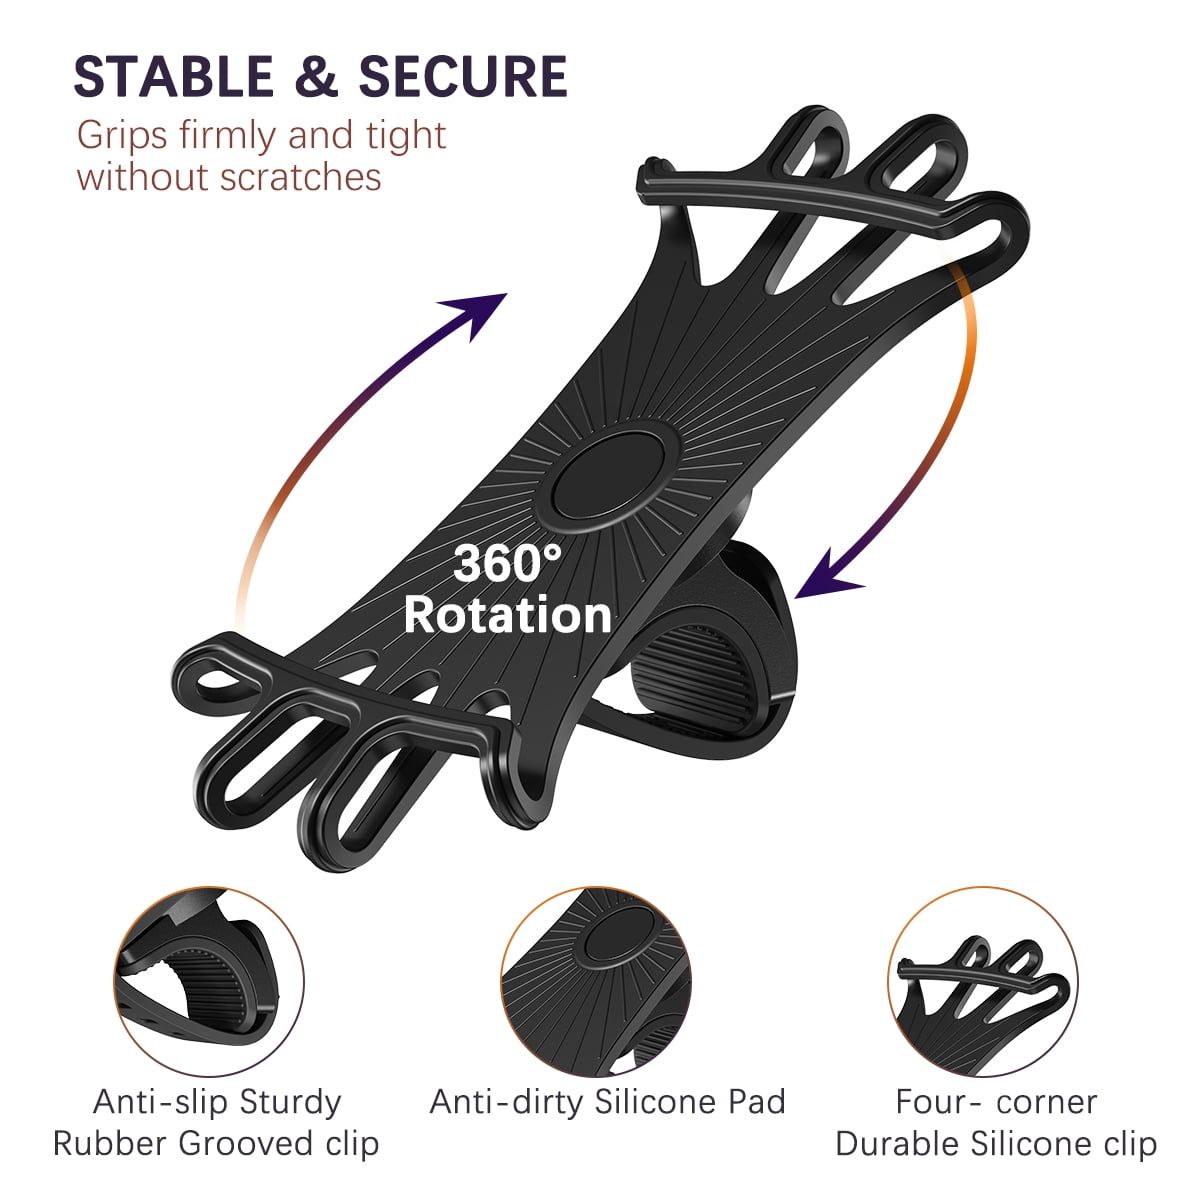 Universal Adjustable Silicone for Most Handlebar Samsung S10/S10E/S9 Black etc Fits with iPhone 11 Pro/XR/XS/X/7/8 Plus Anti-Slip 360°Rotation Bike Phone Mount Cell Phone Holder for Bike 